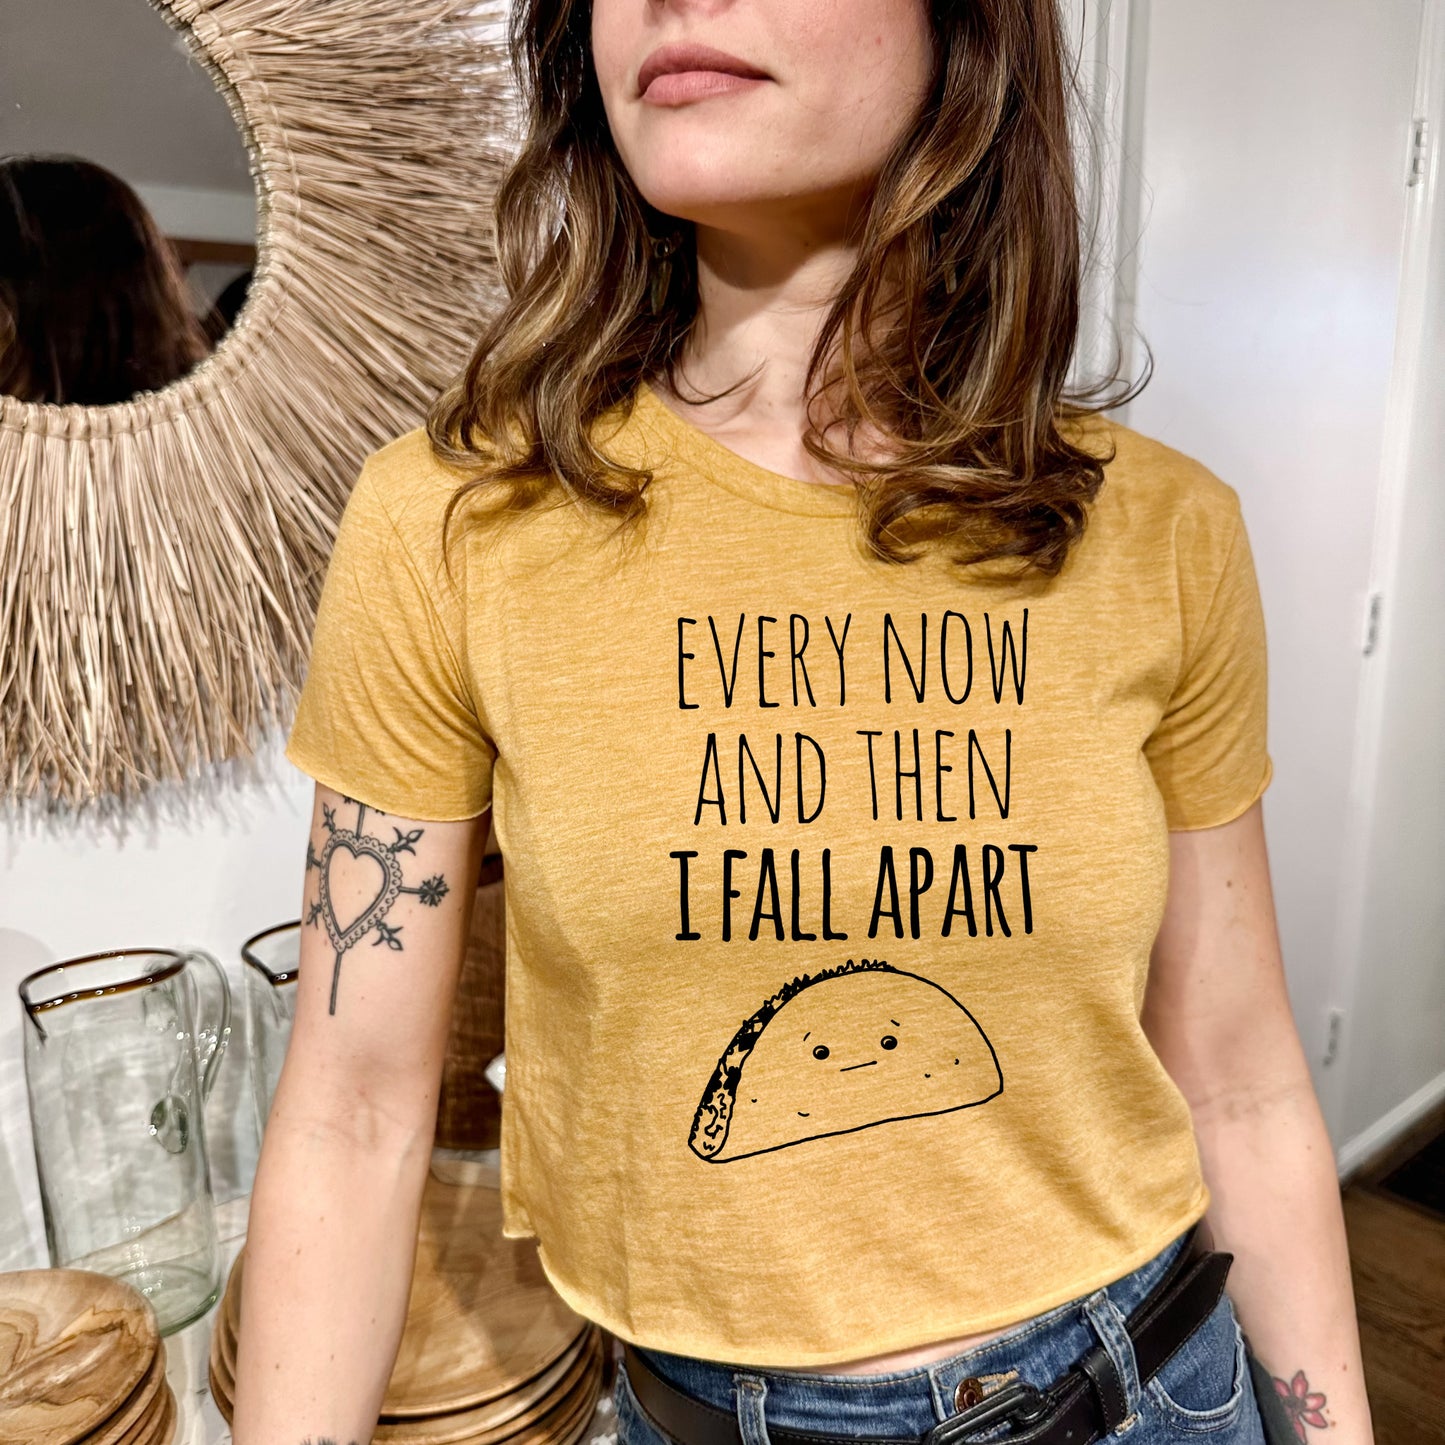 Every Now And Then I Fall Apart (Taco) - Women's Crop Tee - Heather Gray or Gold